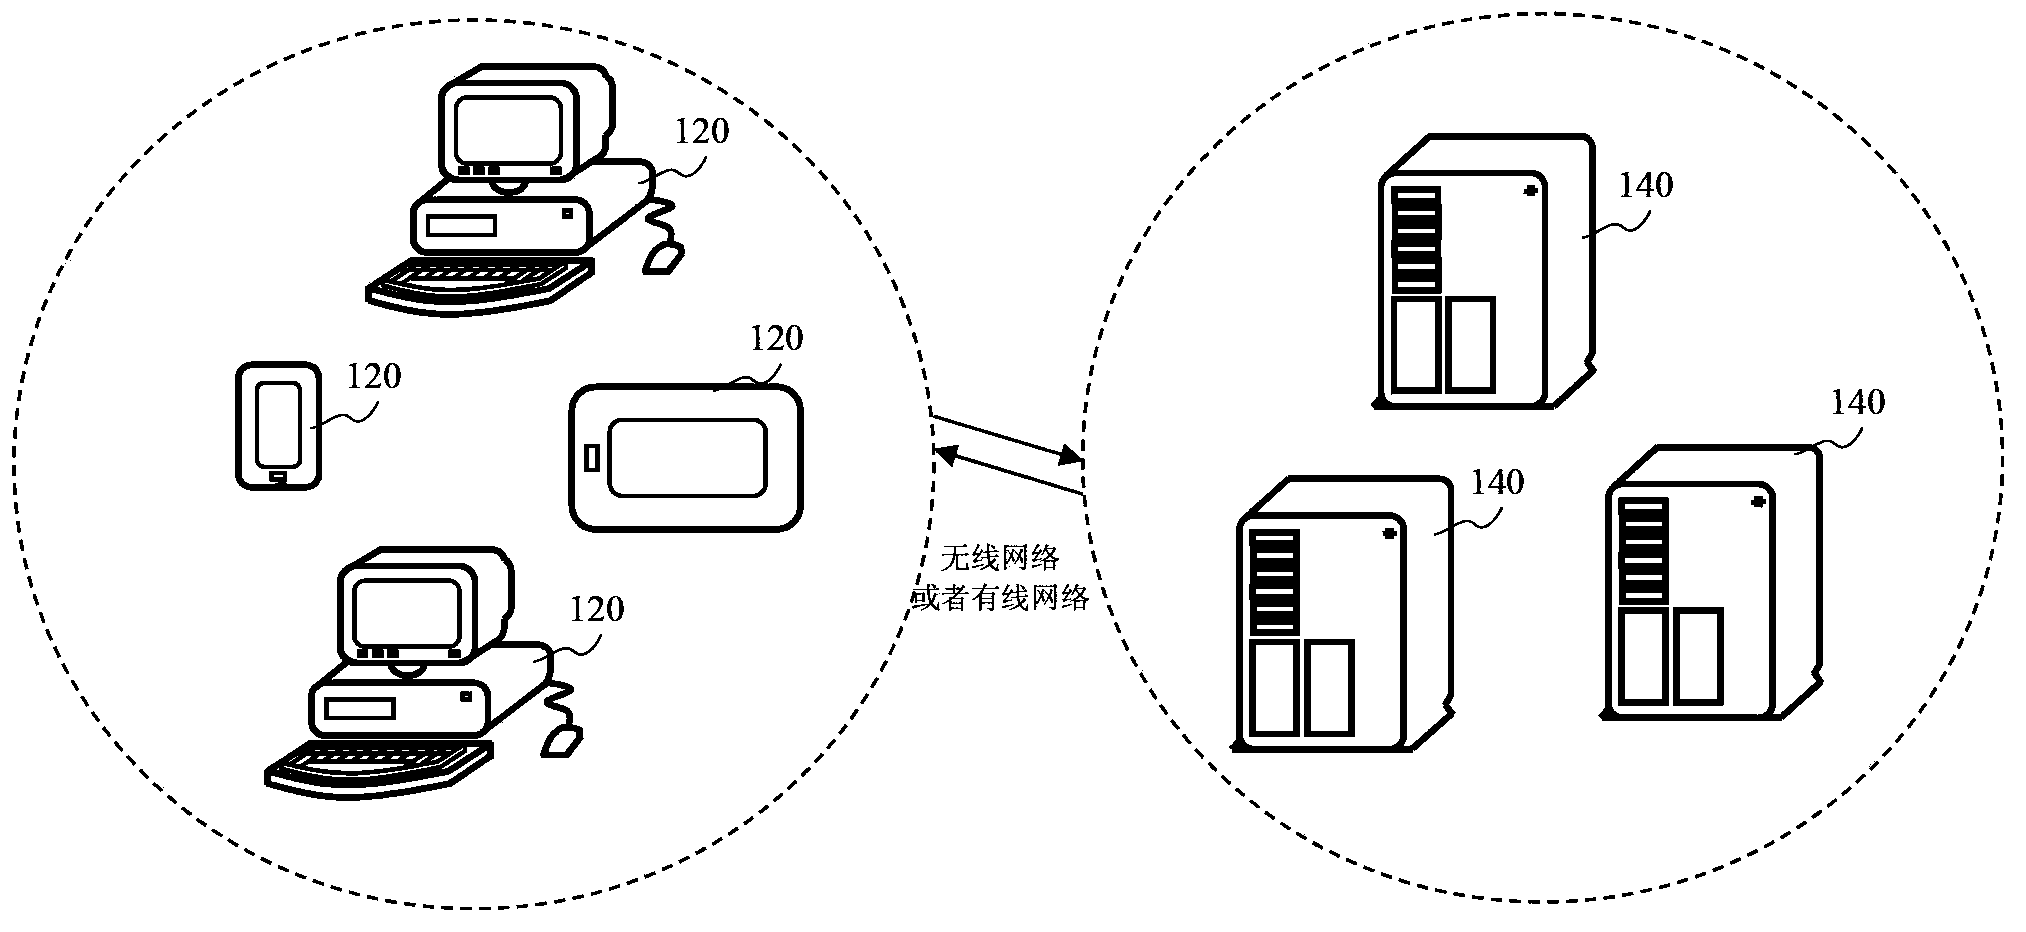 Multi-person audio and video interaction method and system, client, and server